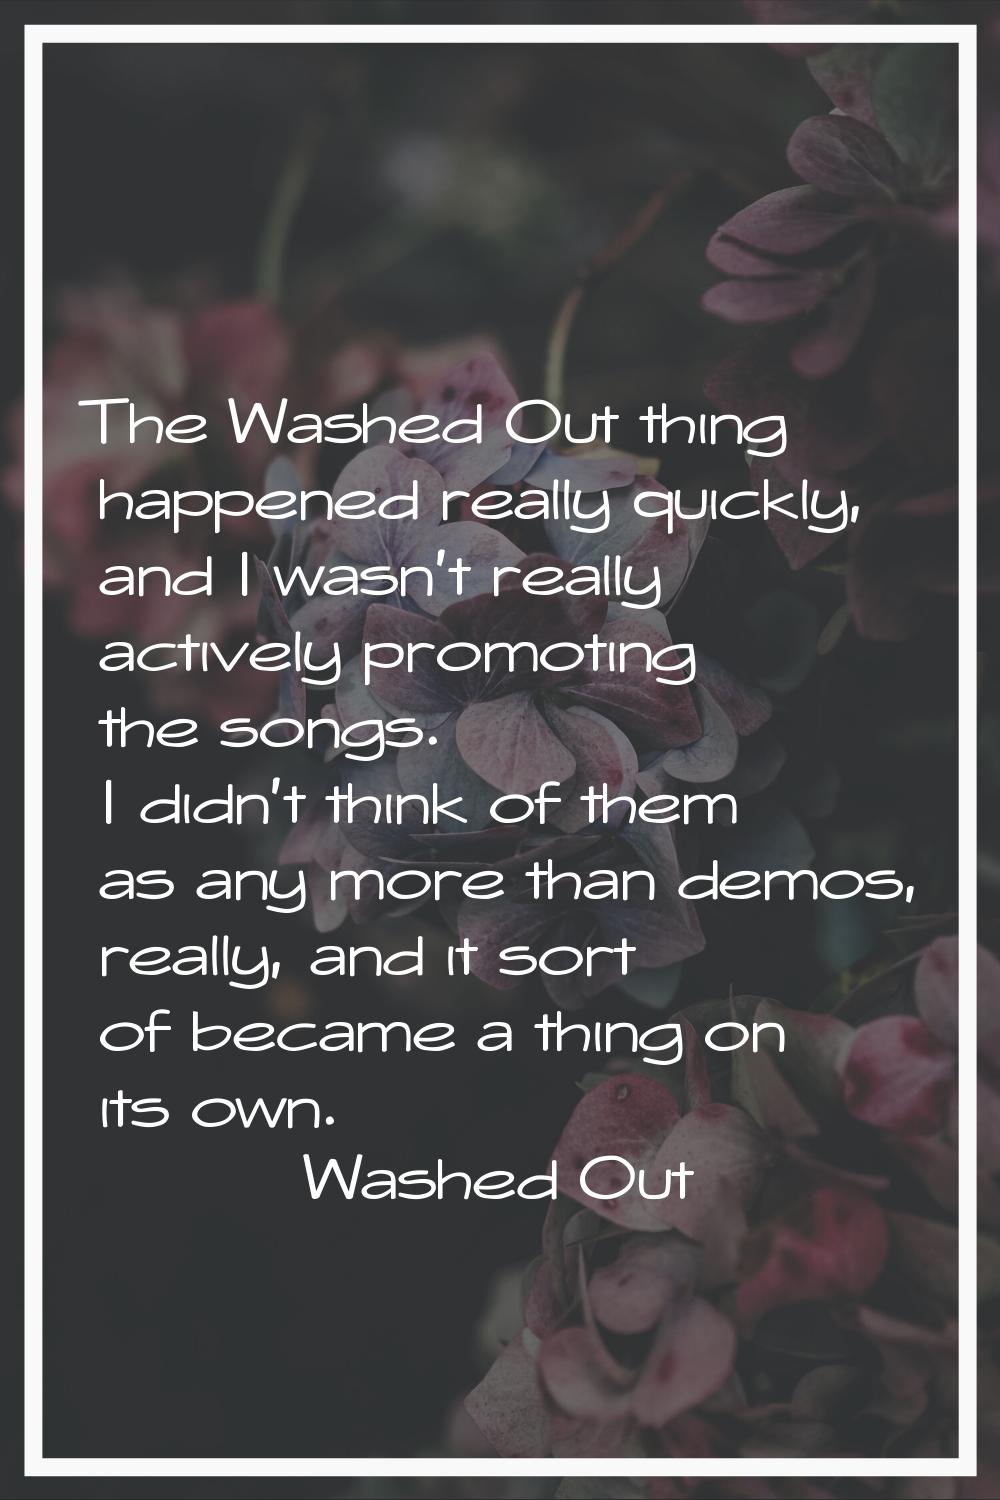 The Washed Out thing happened really quickly, and I wasn't really actively promoting the songs. I d